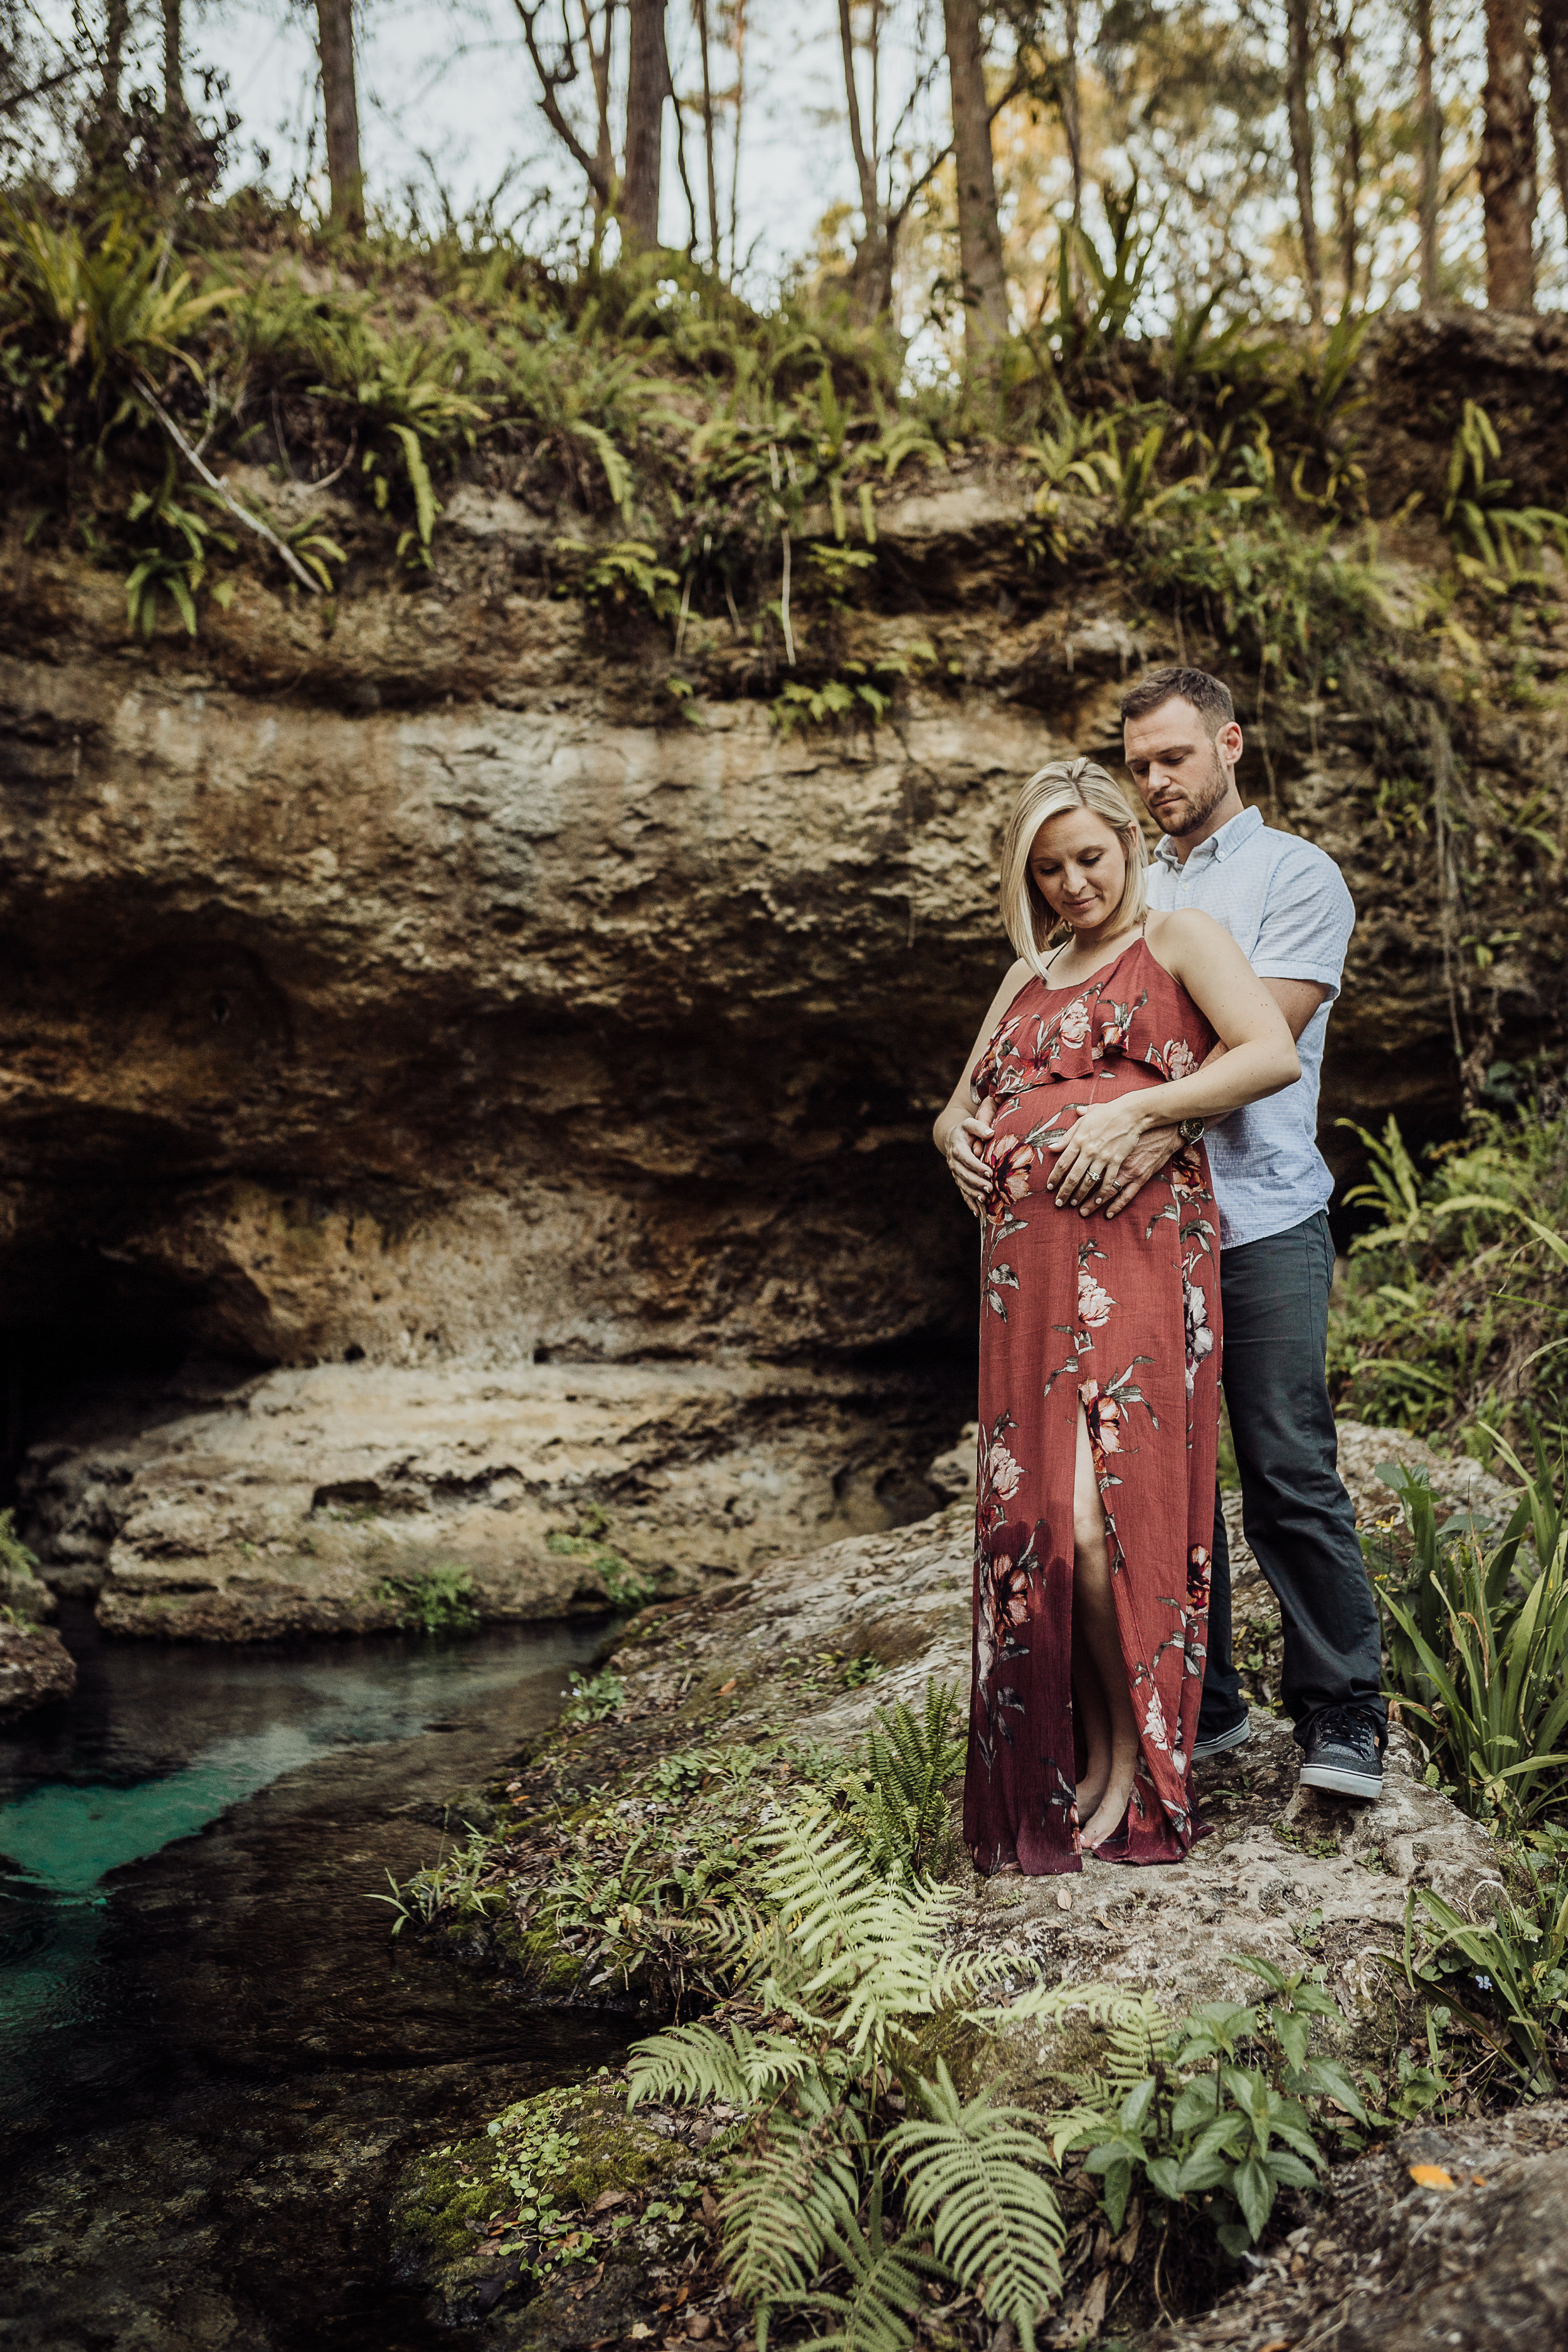 Orlando Maternity Photographer with session location at Kelly Spring park with a boho maxi dress